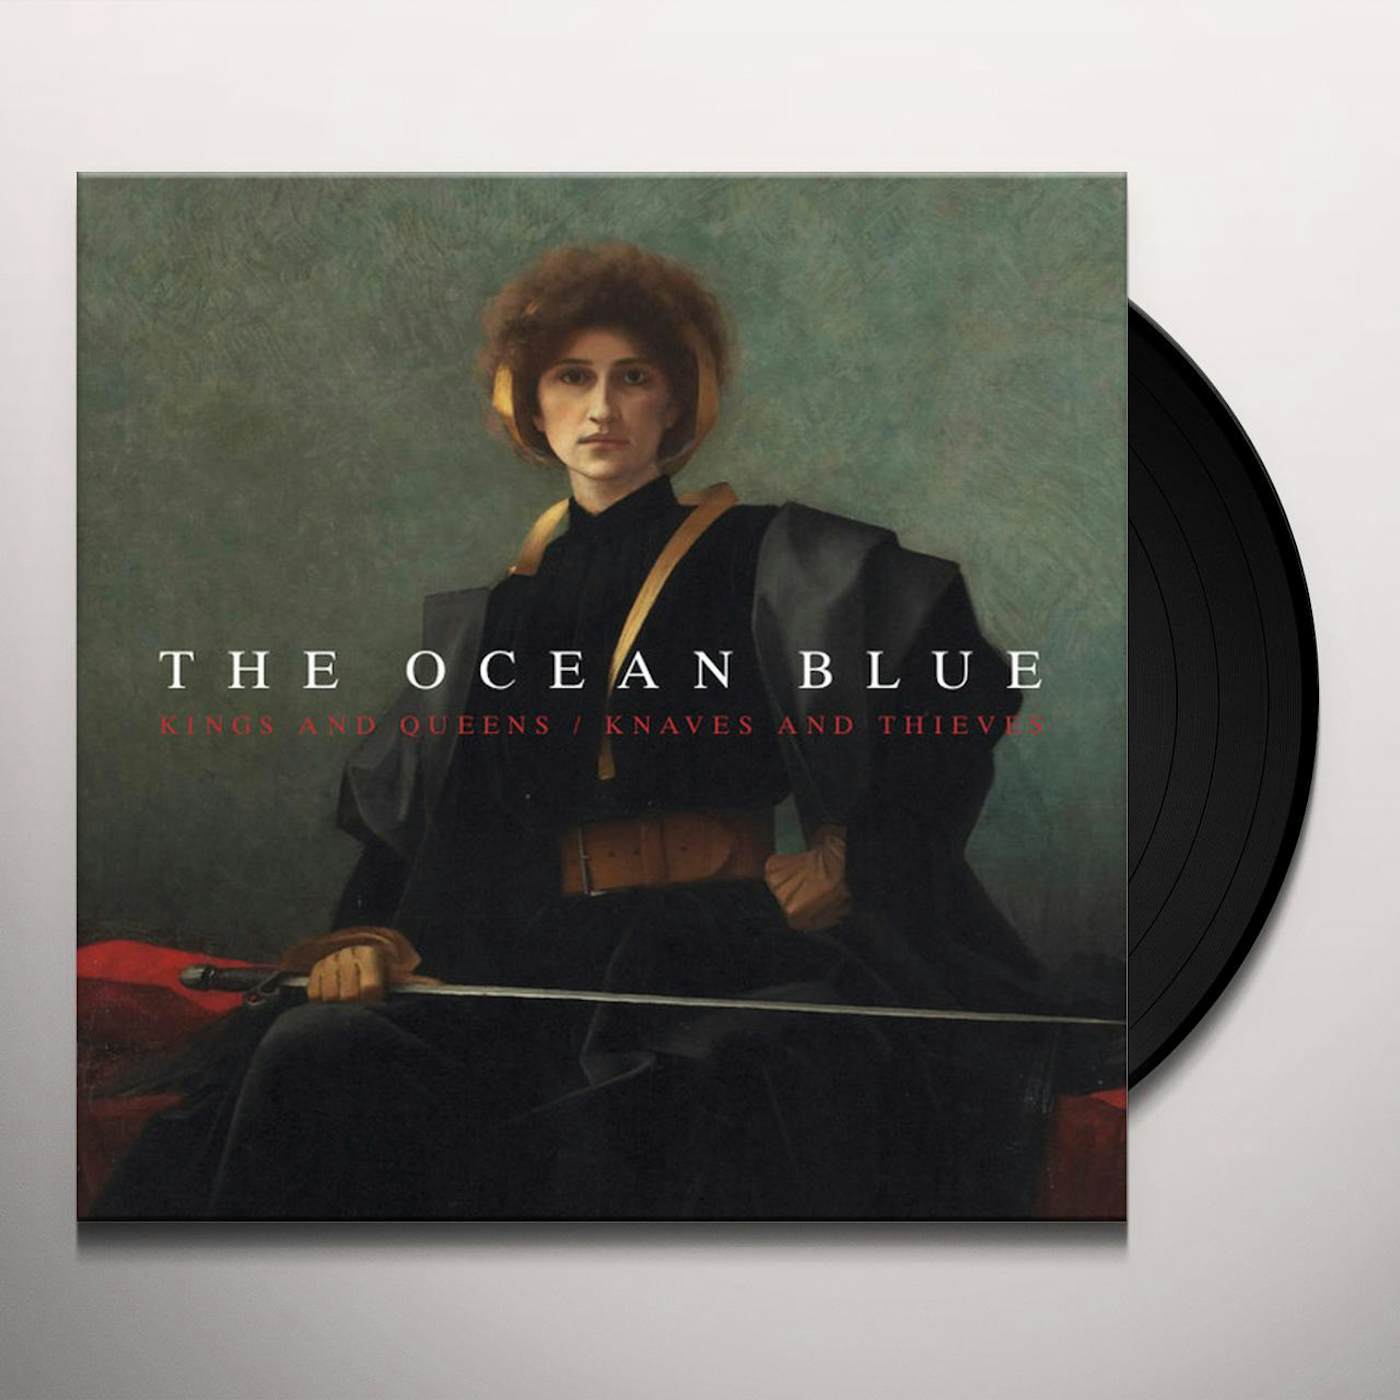 The Ocean Blue Kings and Queens / Knaves and Thieves Vinyl Record